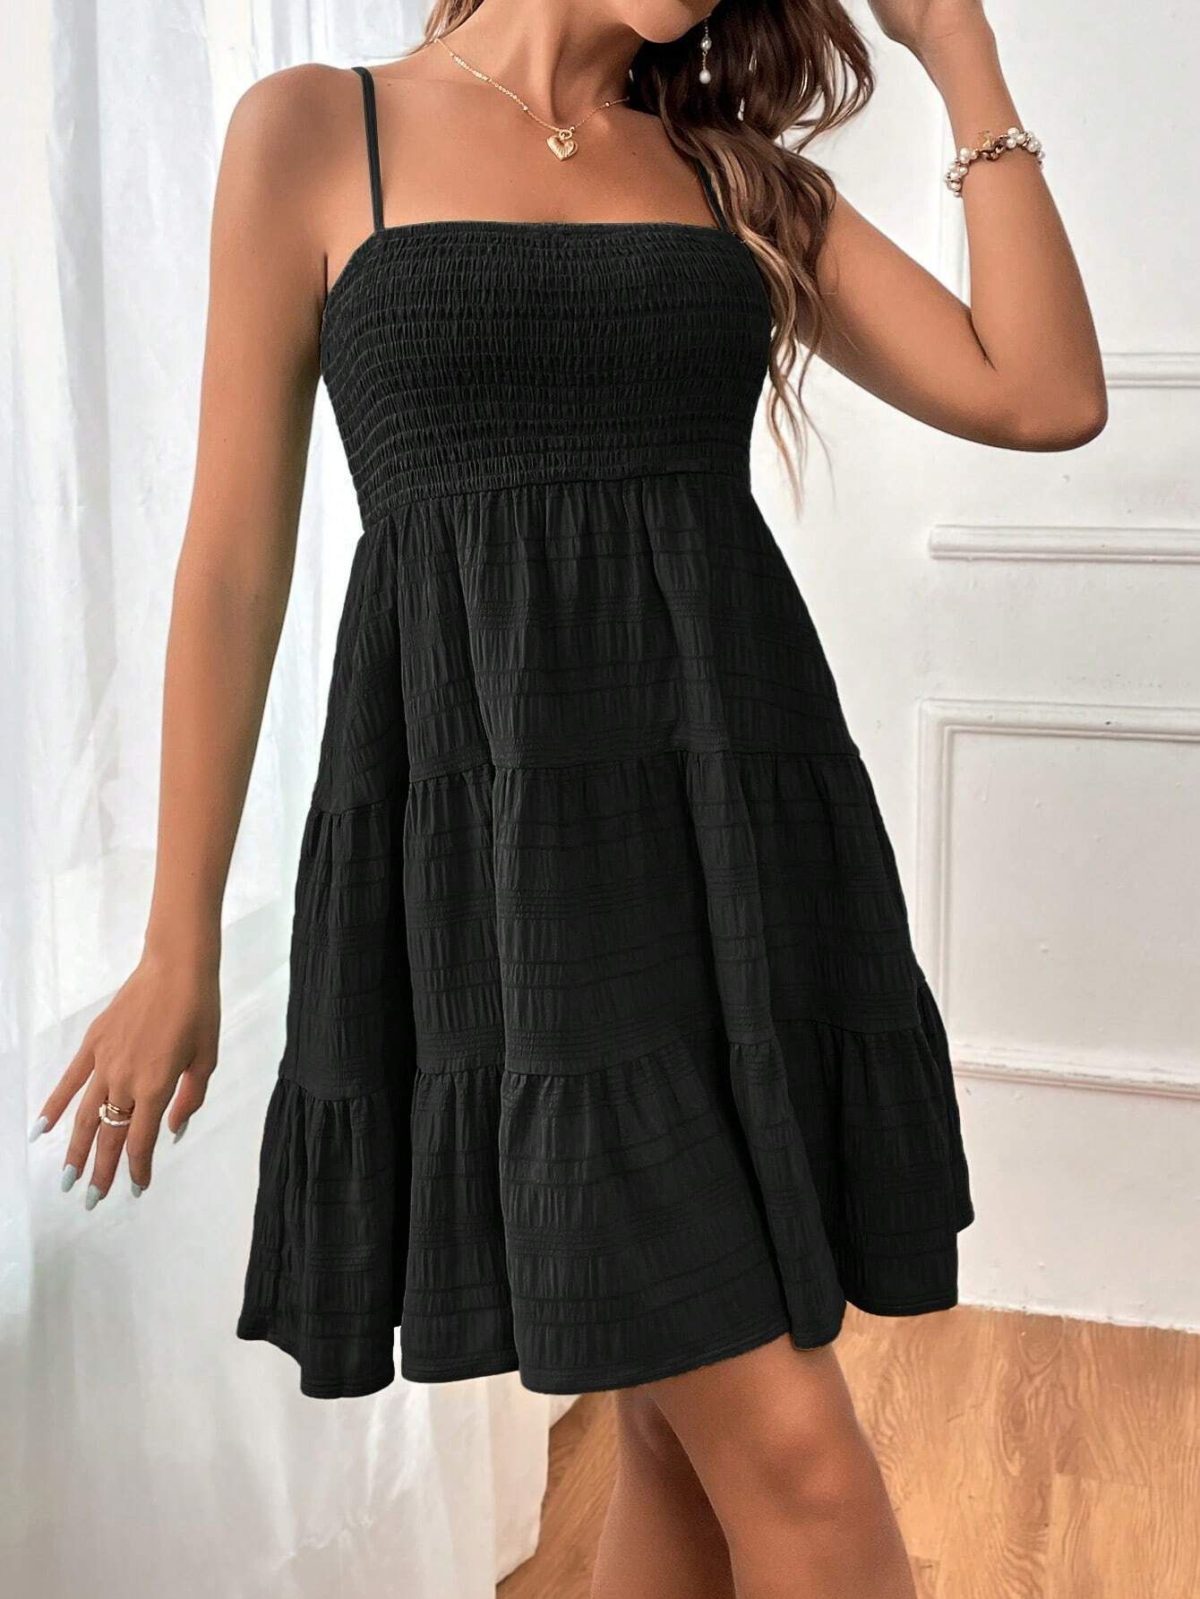 Off Neck Texture Dress in Dresses